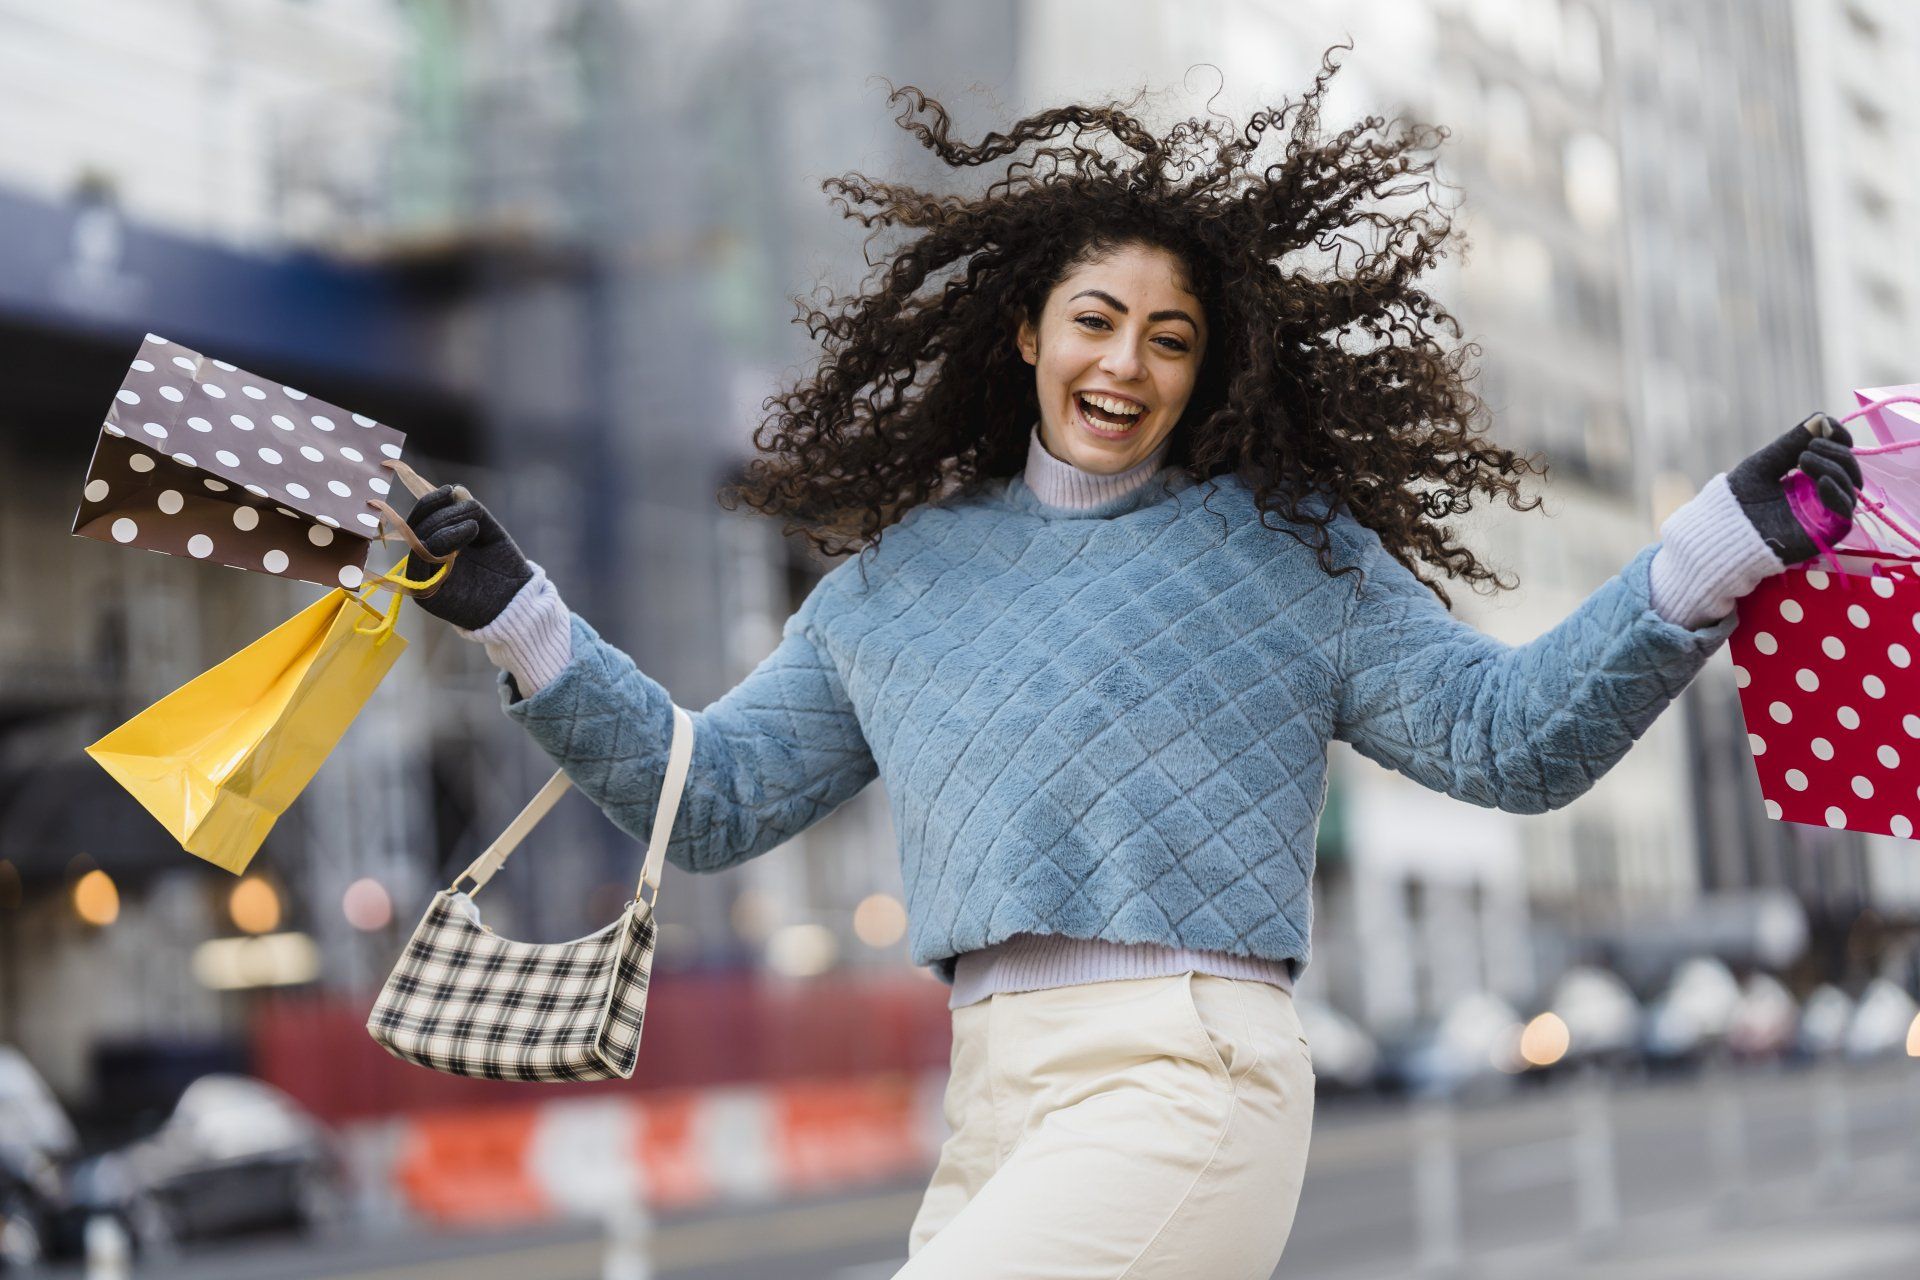 A woman is jumping in the air while holding shopping bags.